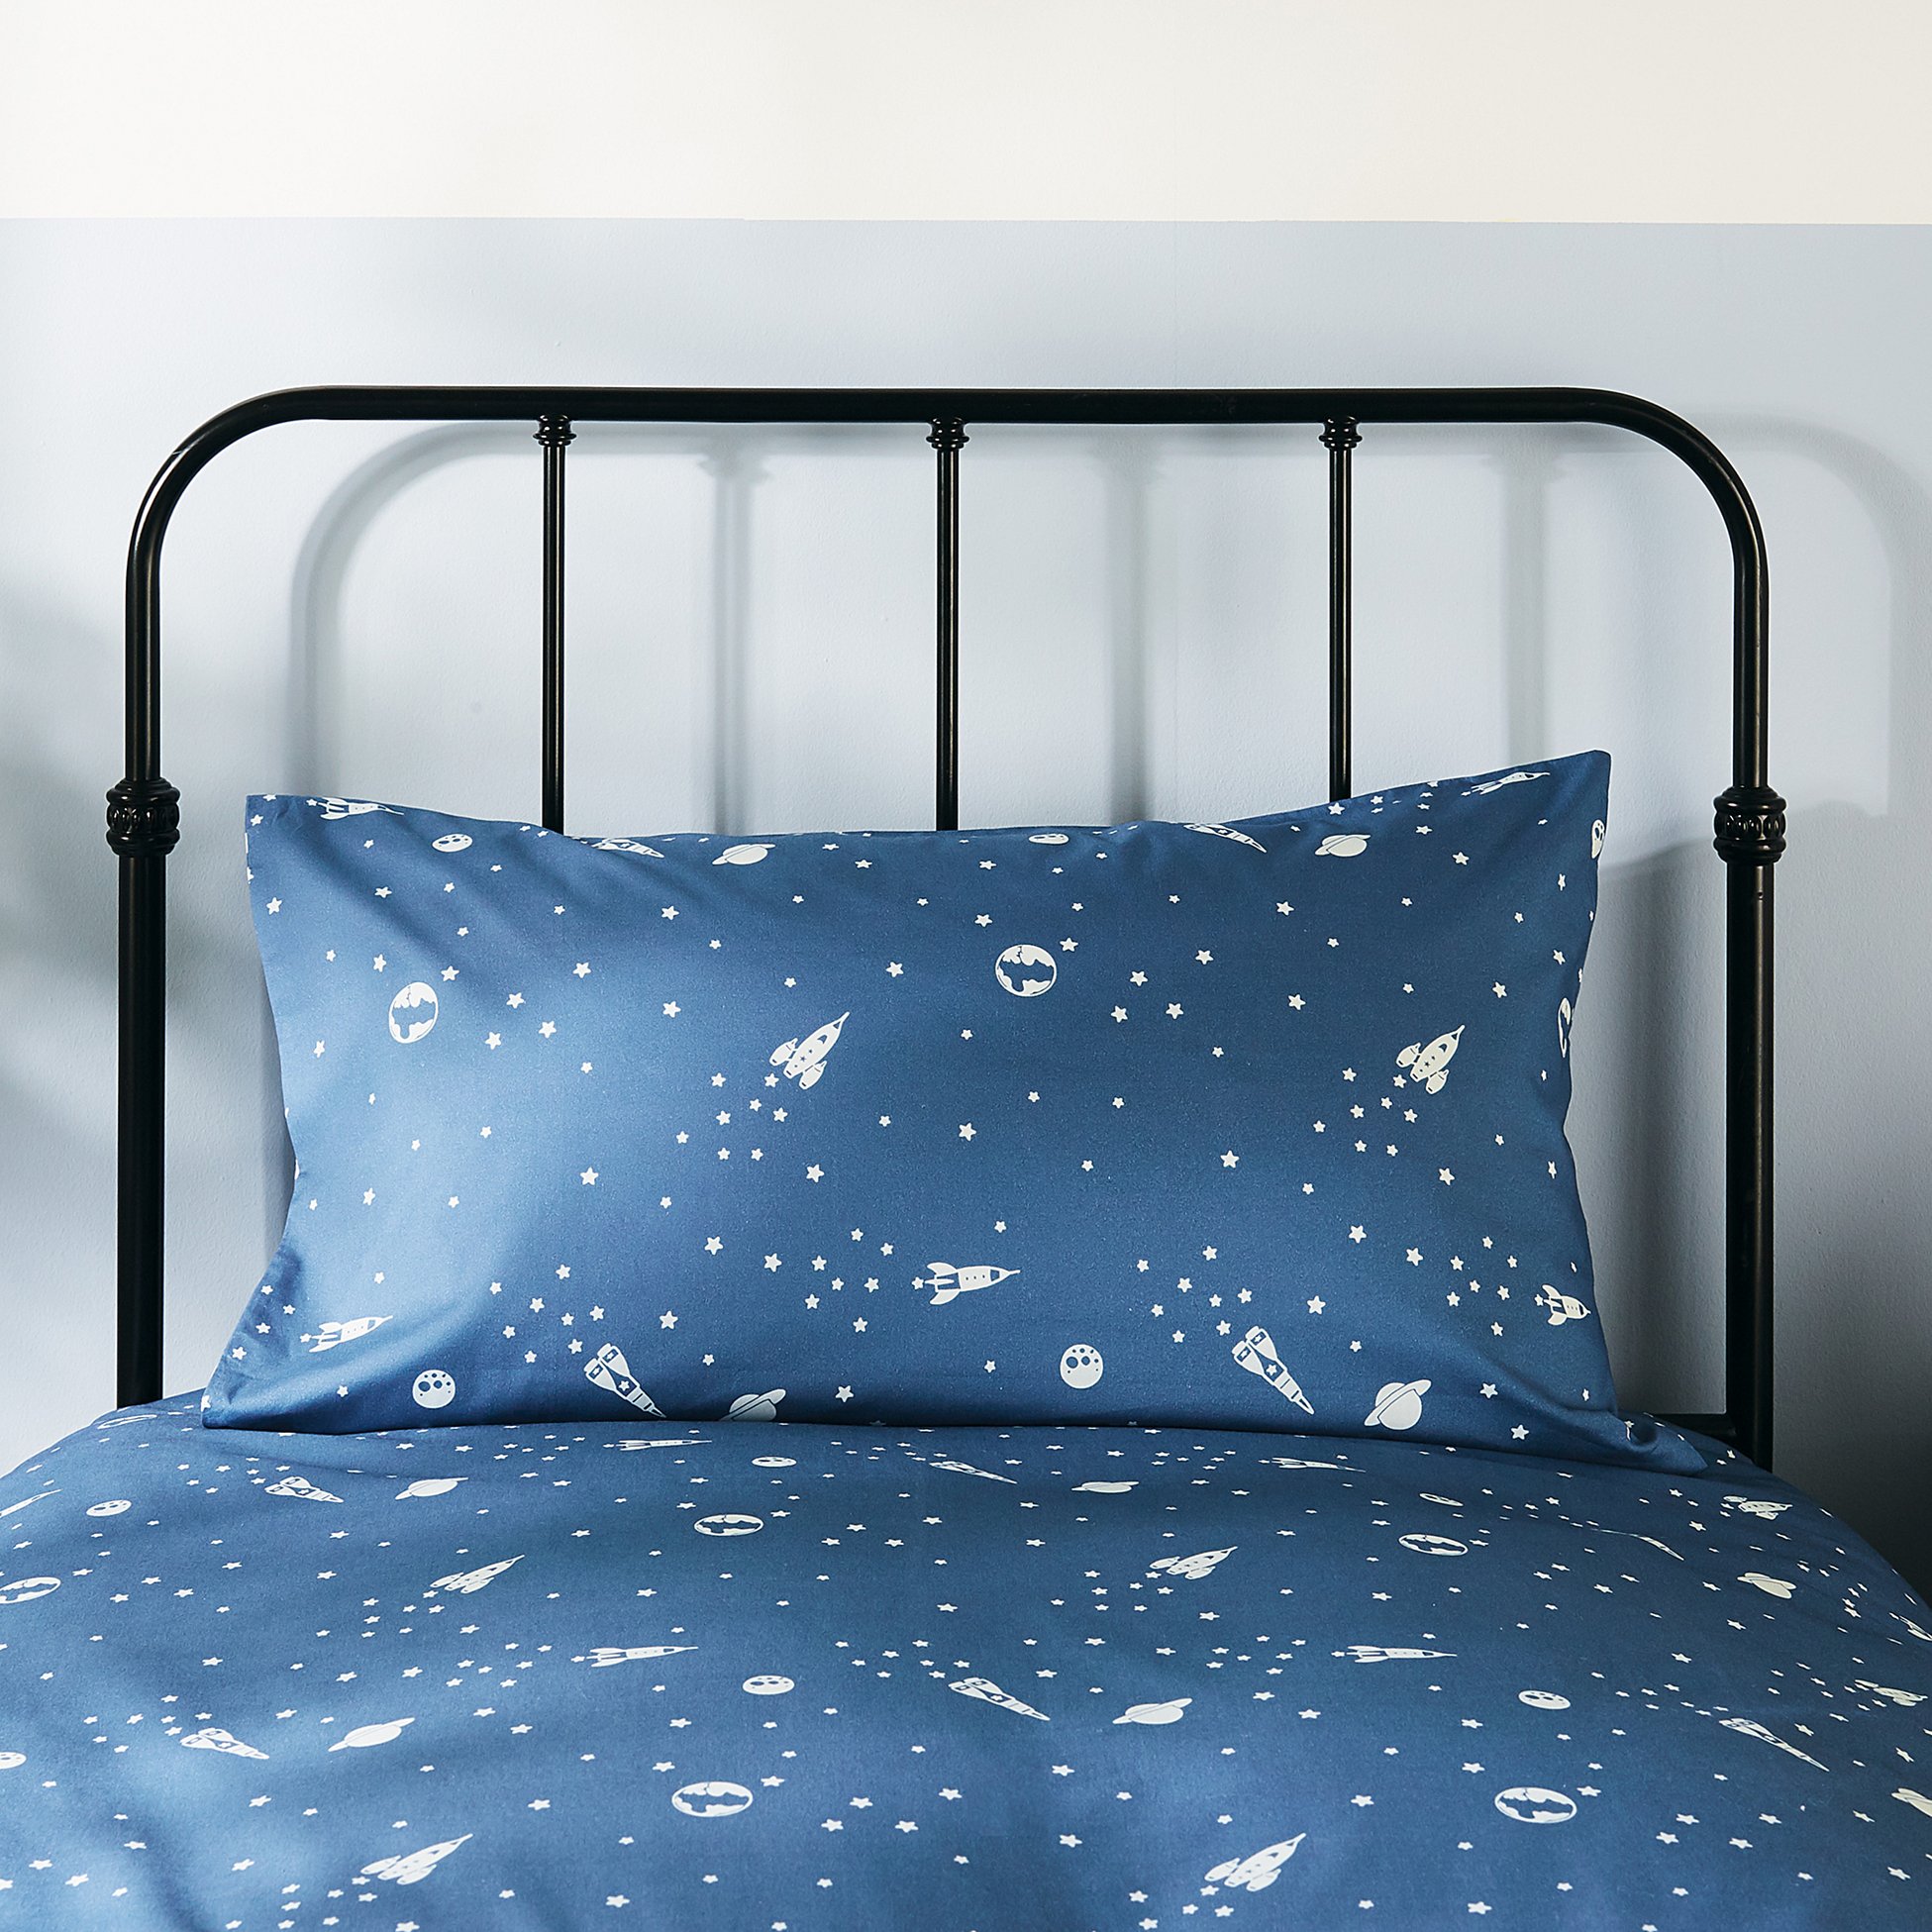 Glow In The Dark Space Bed Linen Set, Space Glow In The Dark Duvet Cover And Pillowcase Set